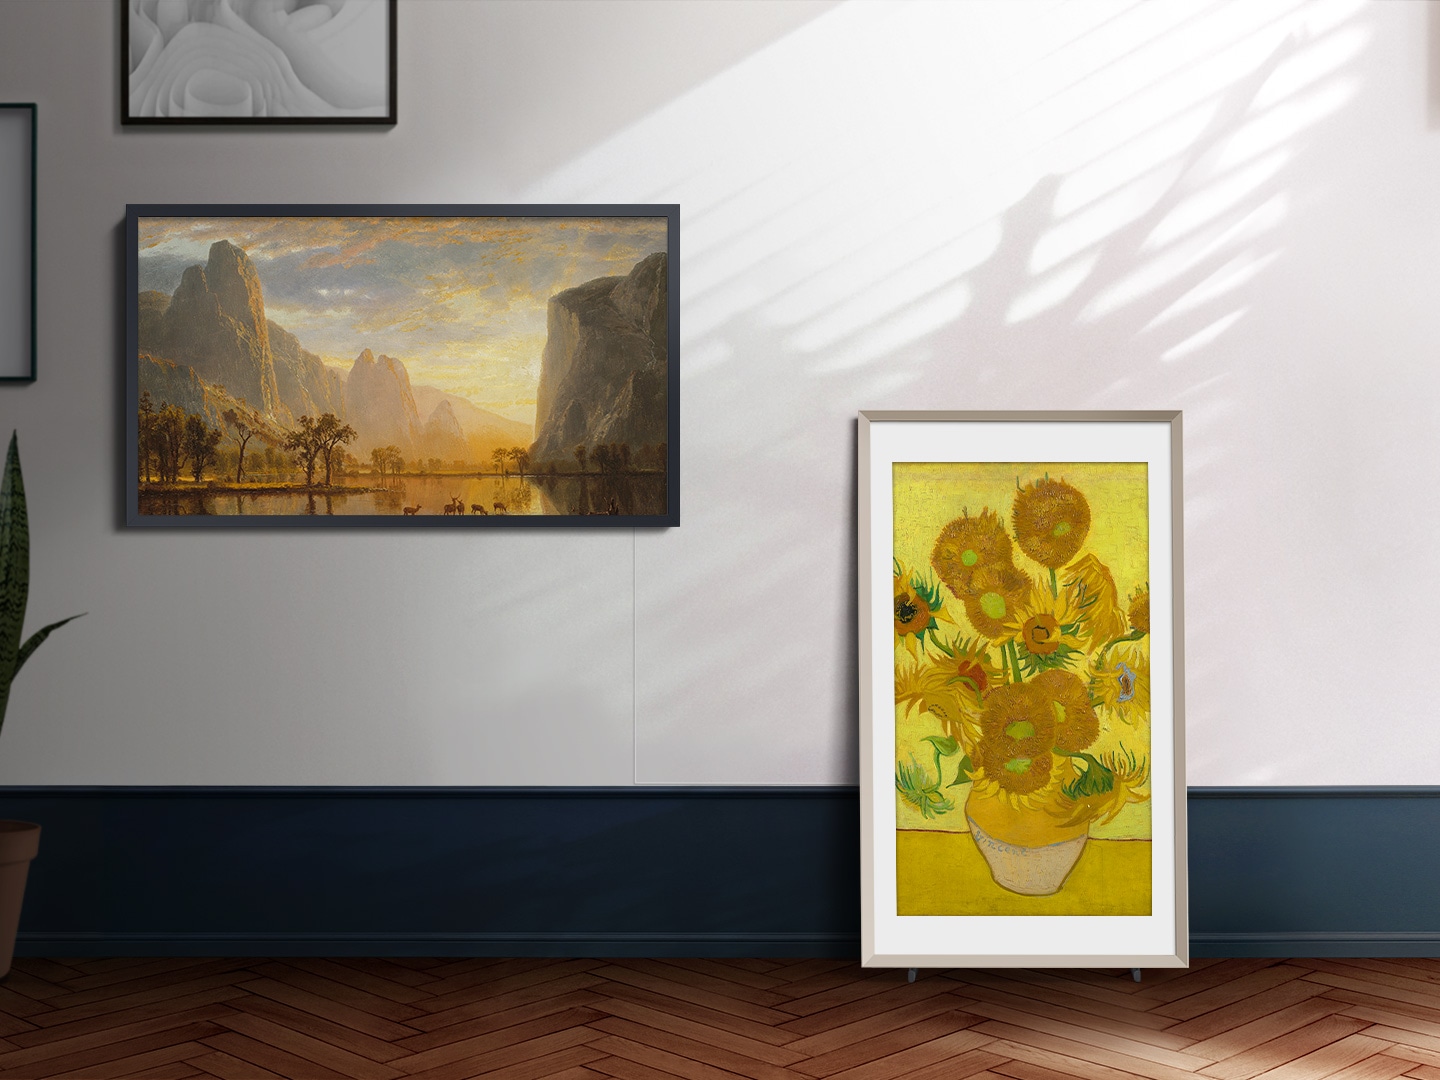 An artwork is on display on The Frame which looks like a picture frame next to other pictures on the wall.